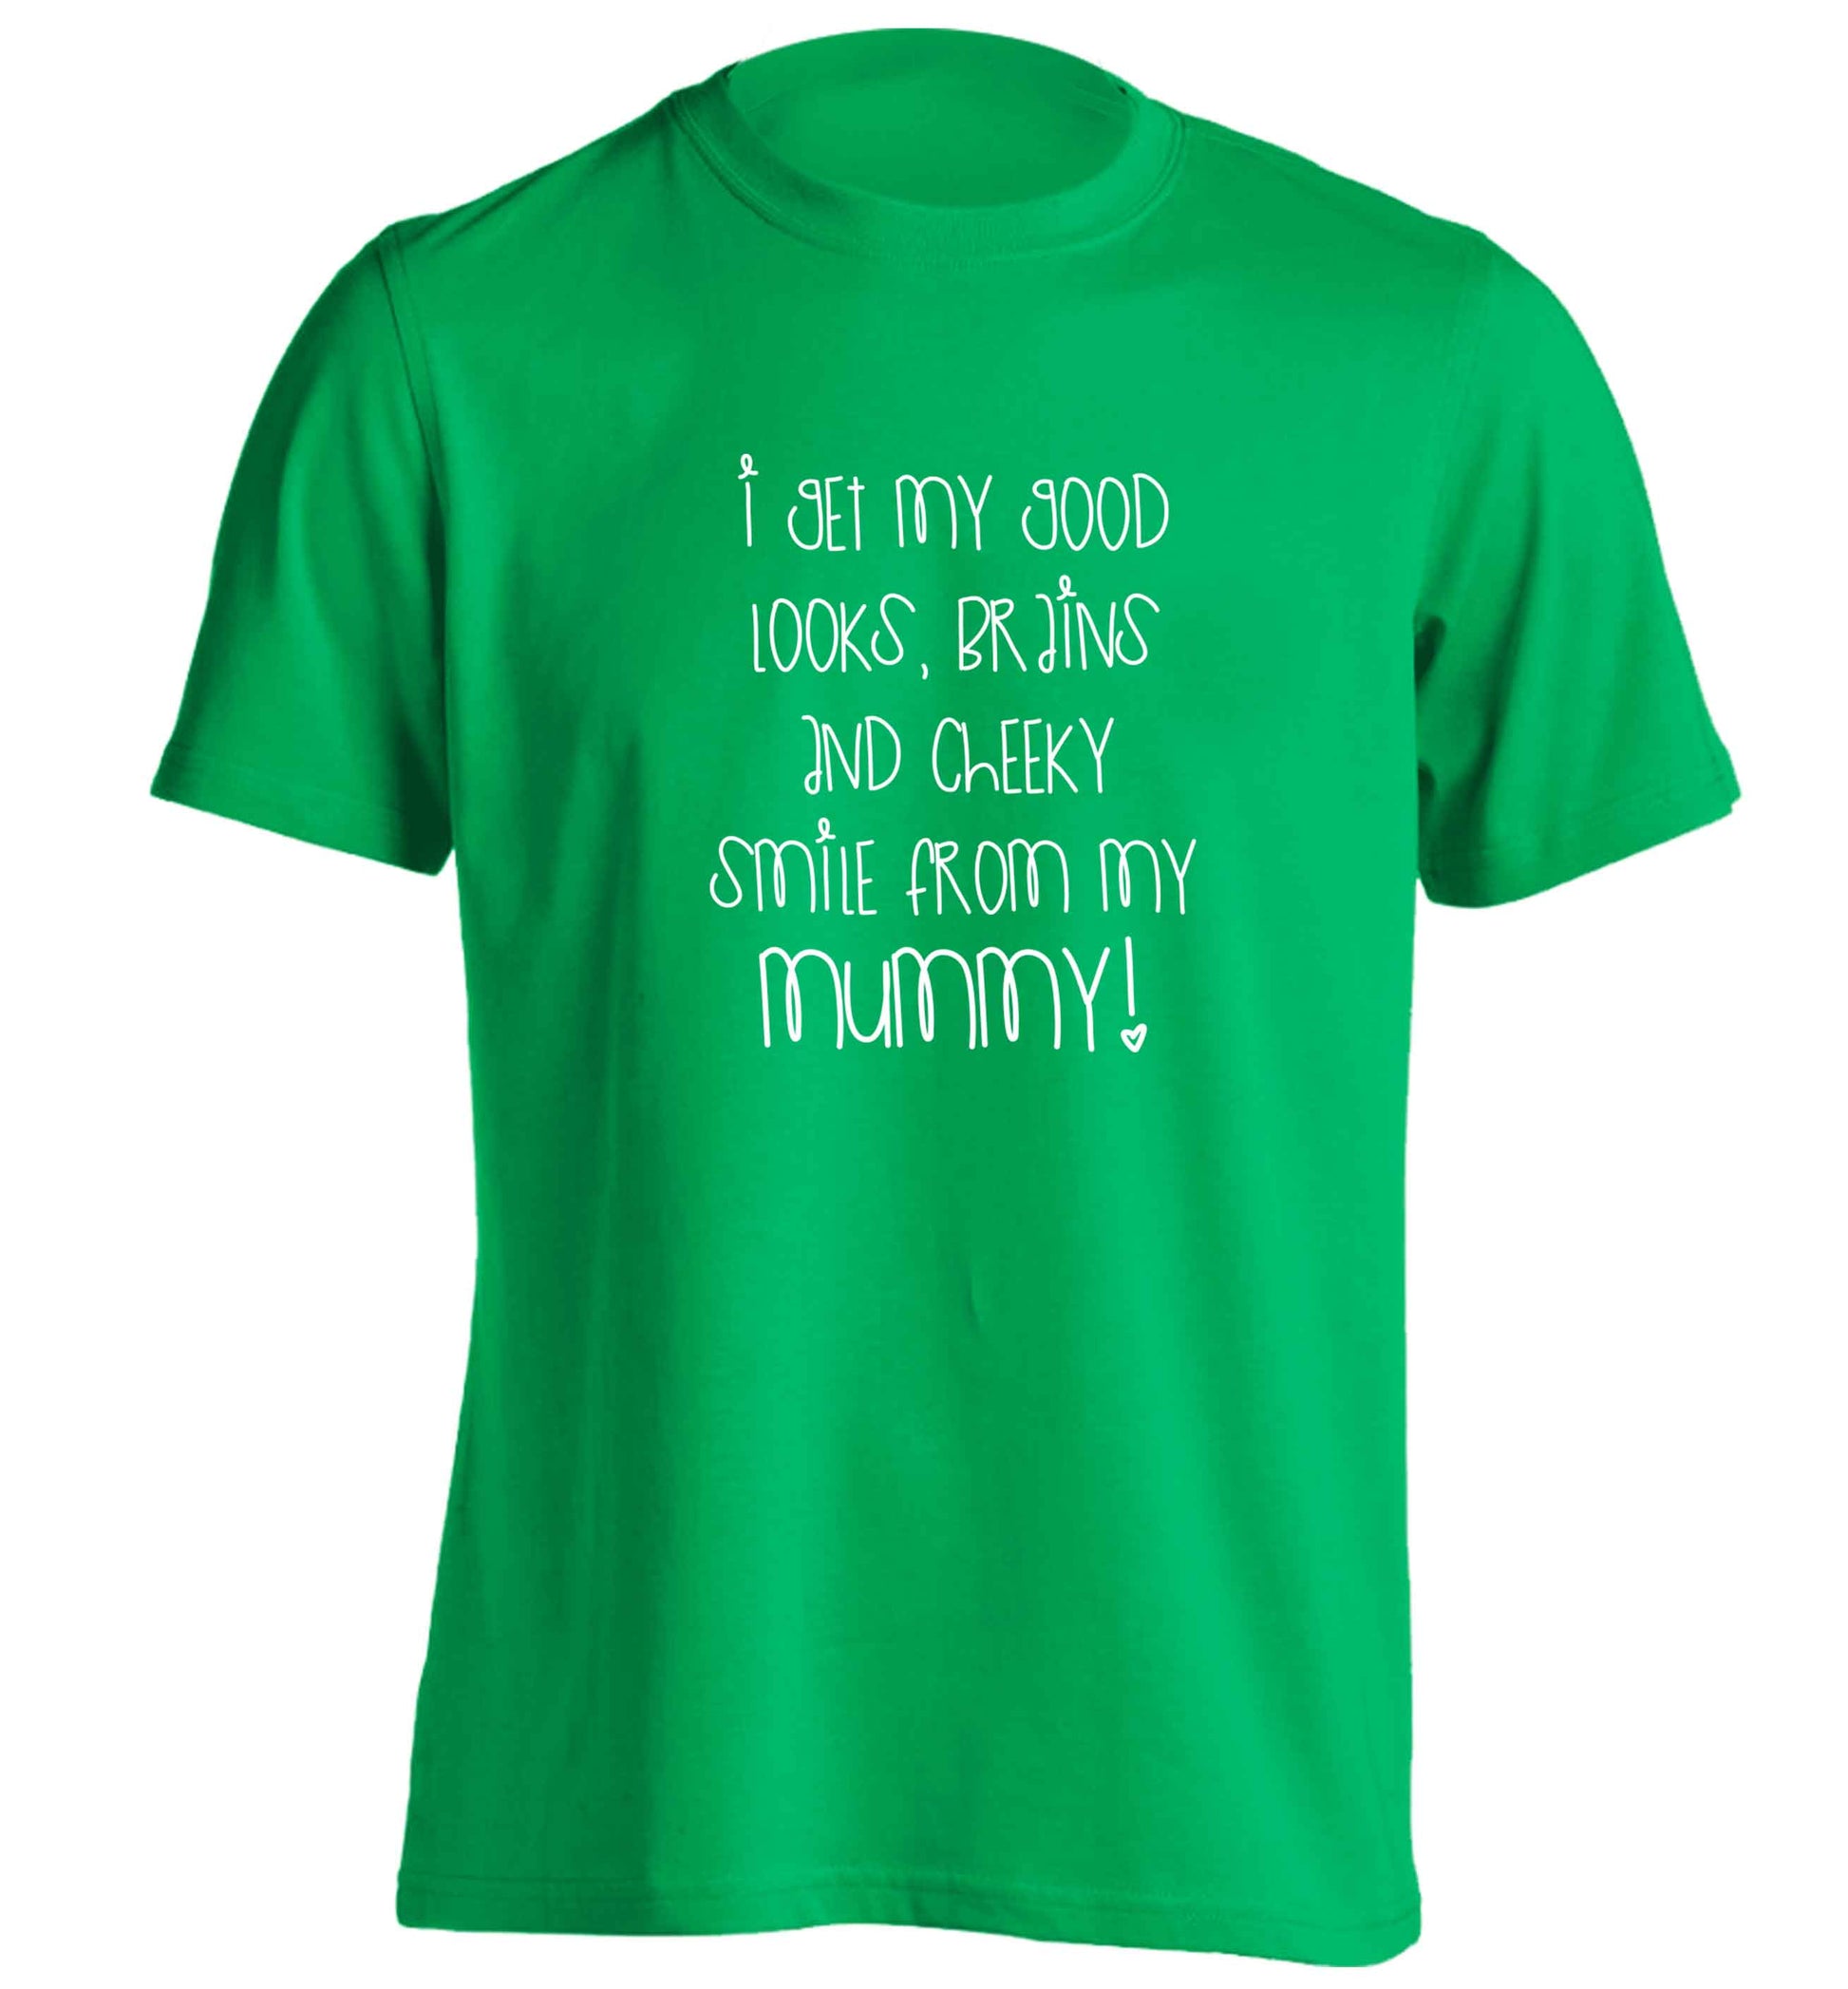 I get my good looks, brains and cheeky smile from my mummy adults unisex green Tshirt 2XL